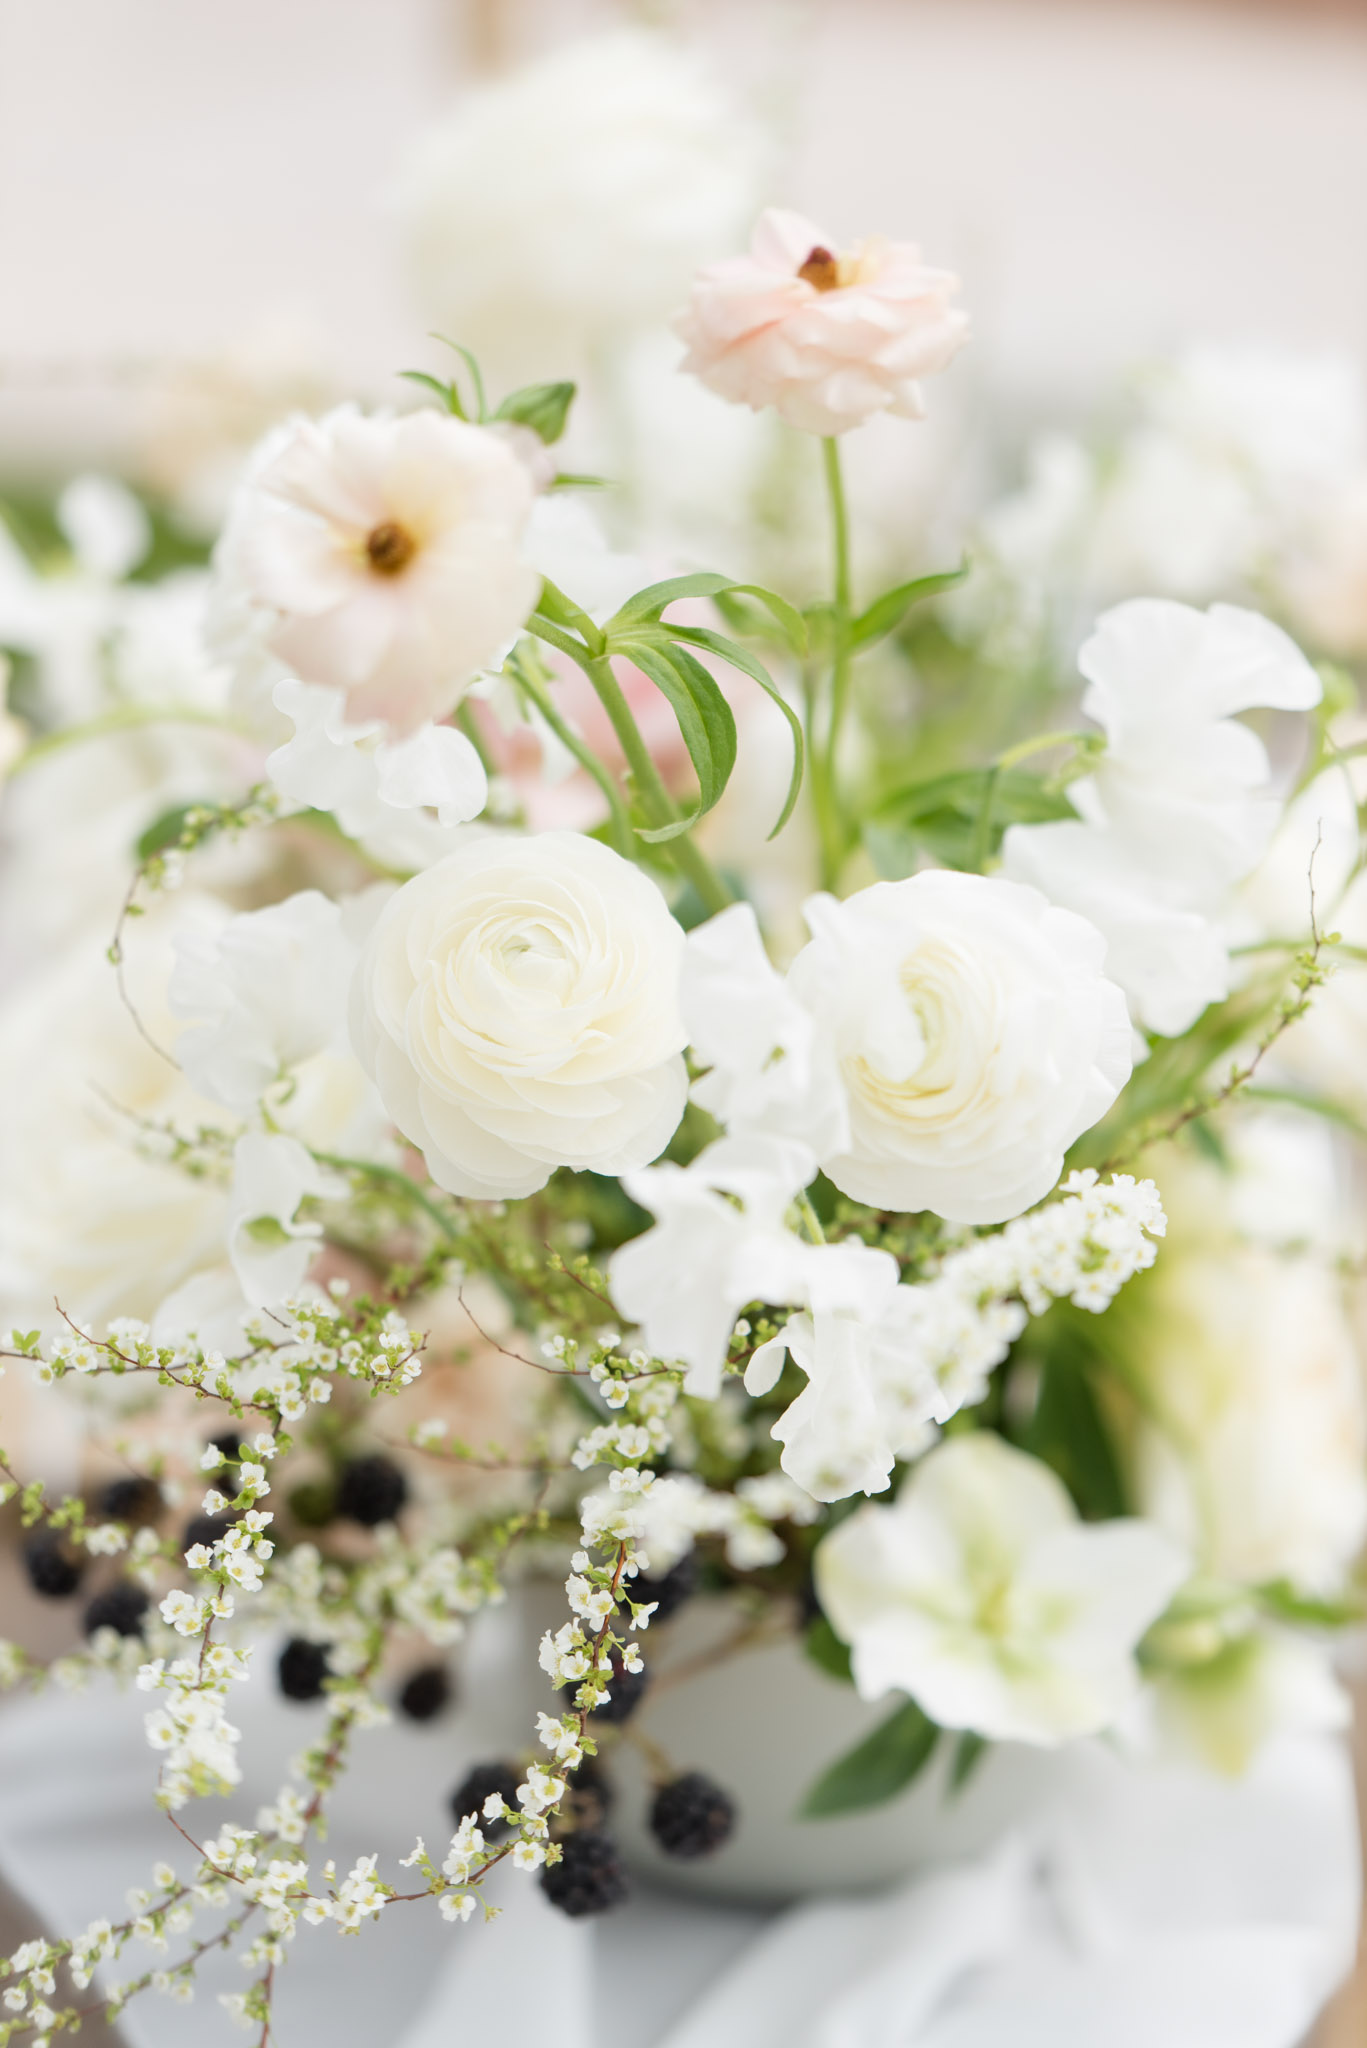 Floral arrangement with white and blush flowers.